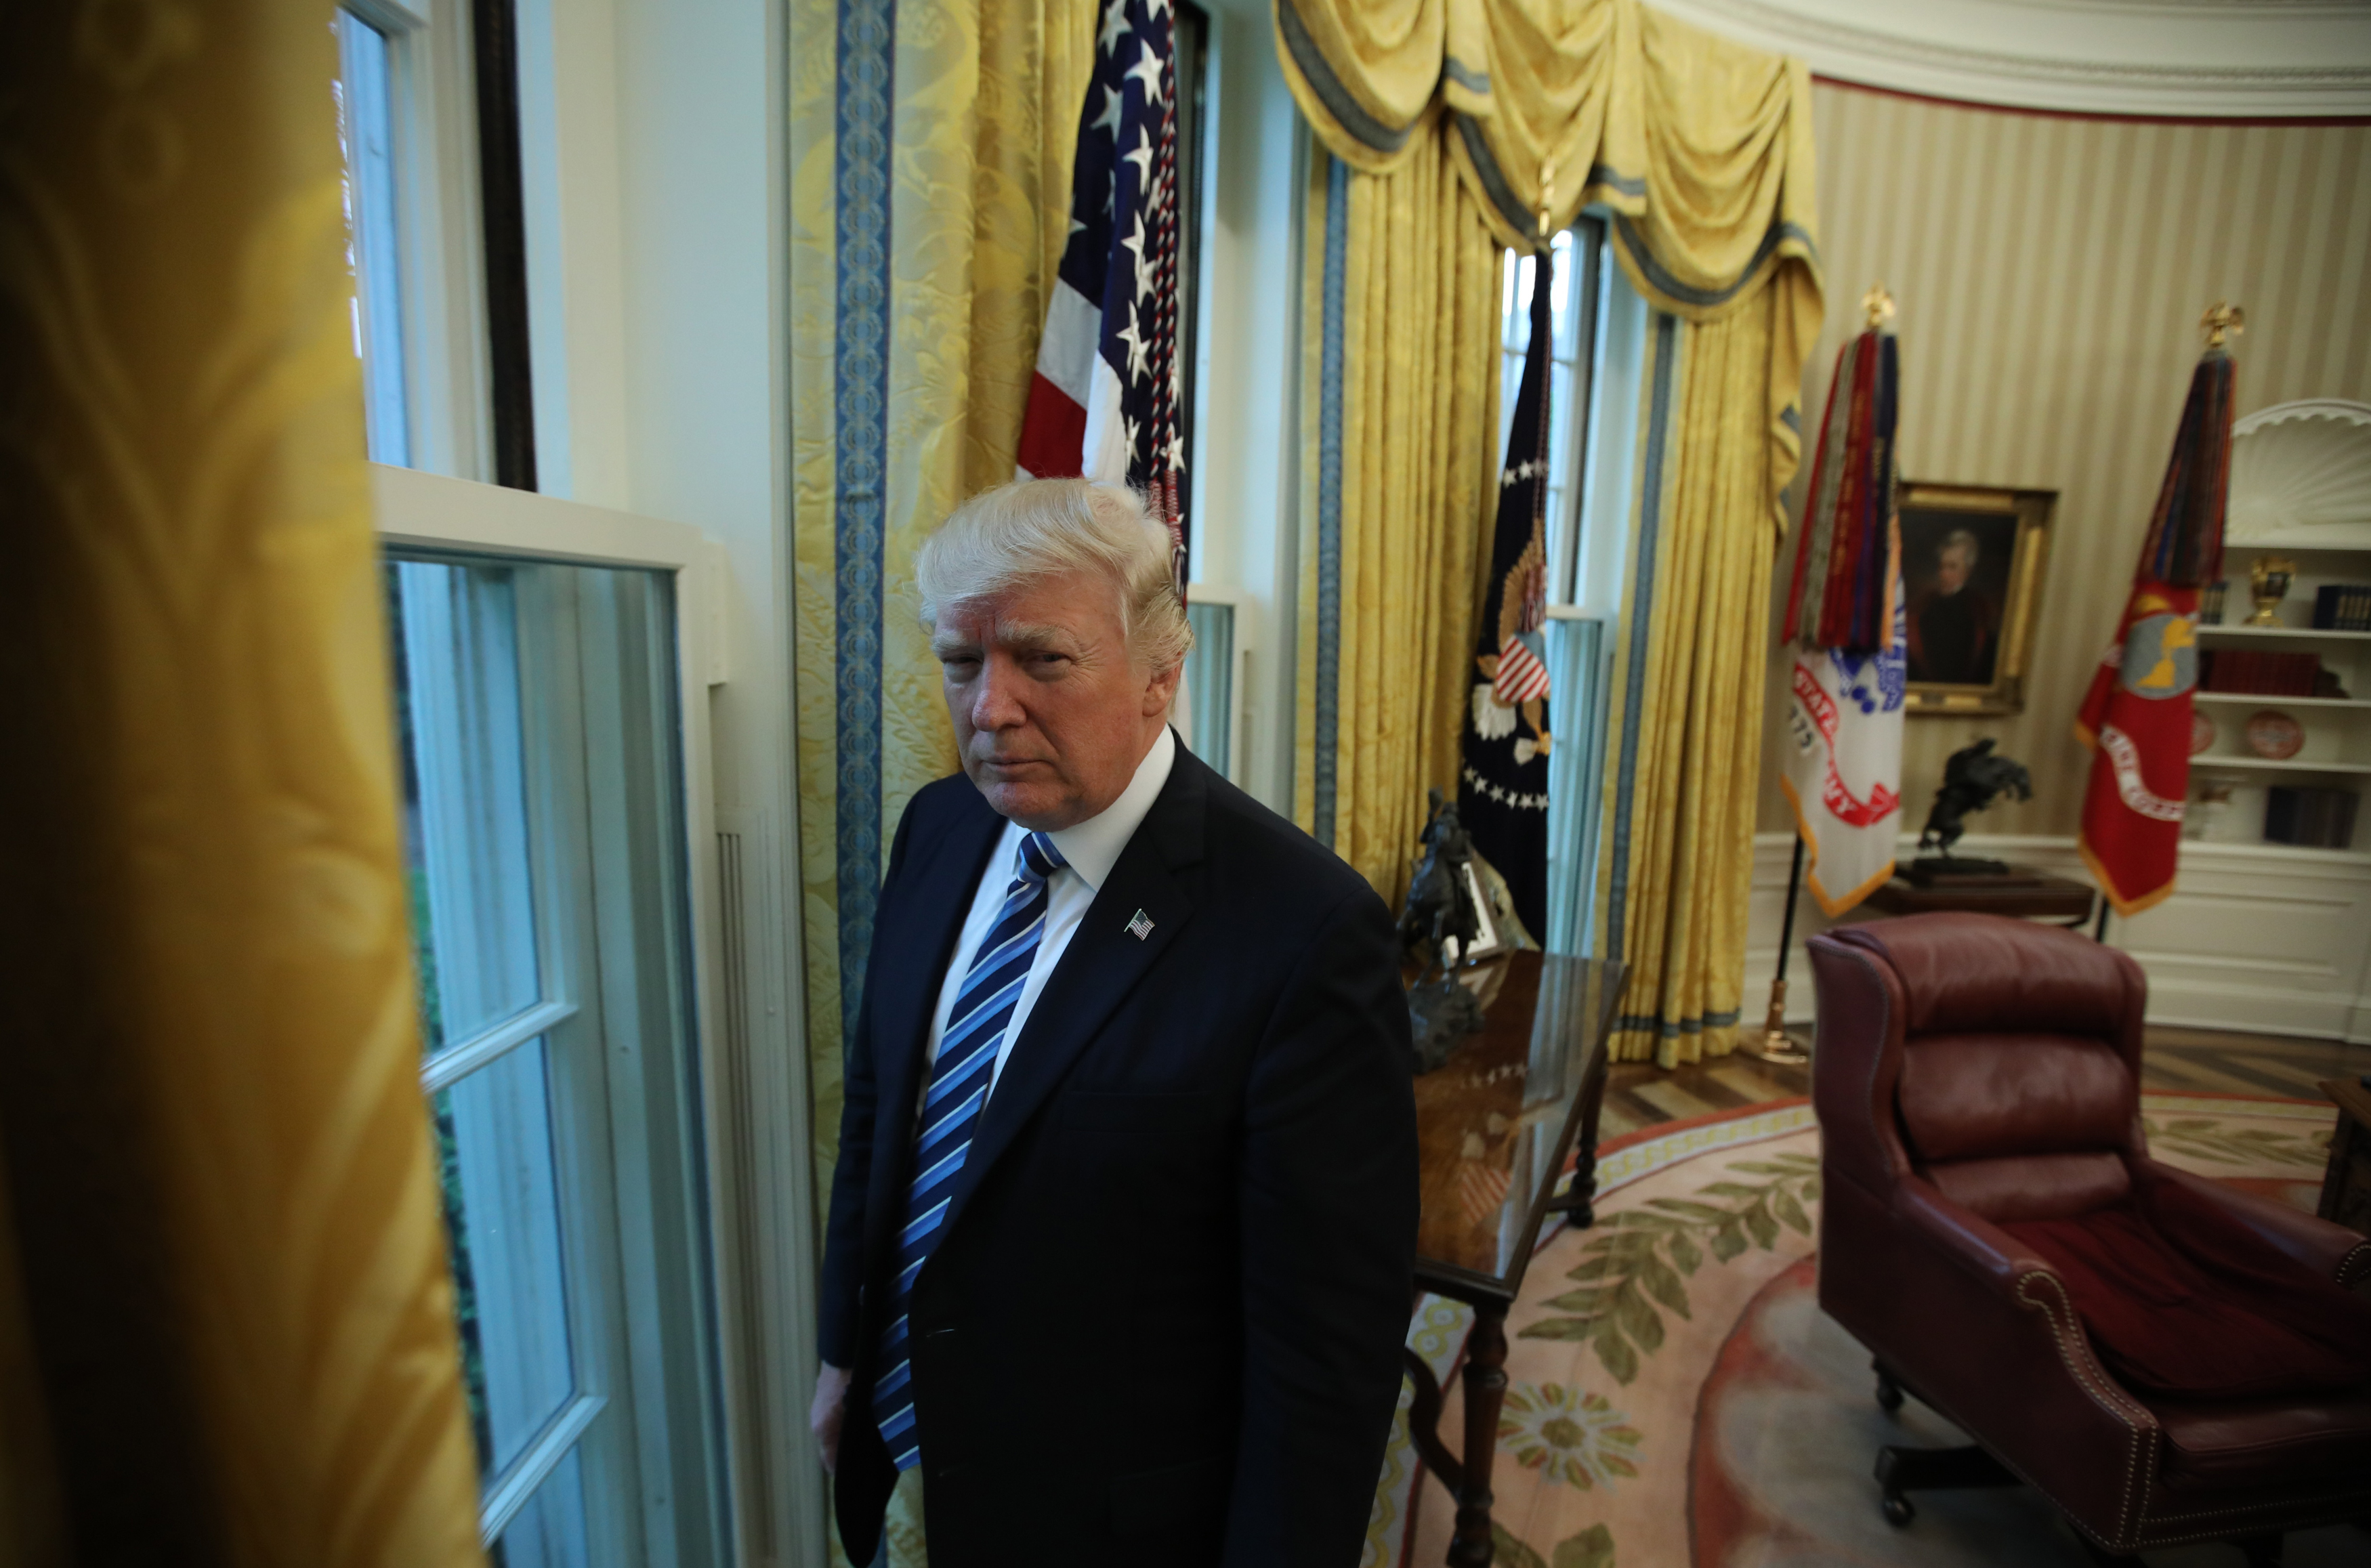 President Trump stands in the Oval Office following an interview with Reuters at the White House in Washington, April 27, 2017. (Carlos Barria—Reuters)